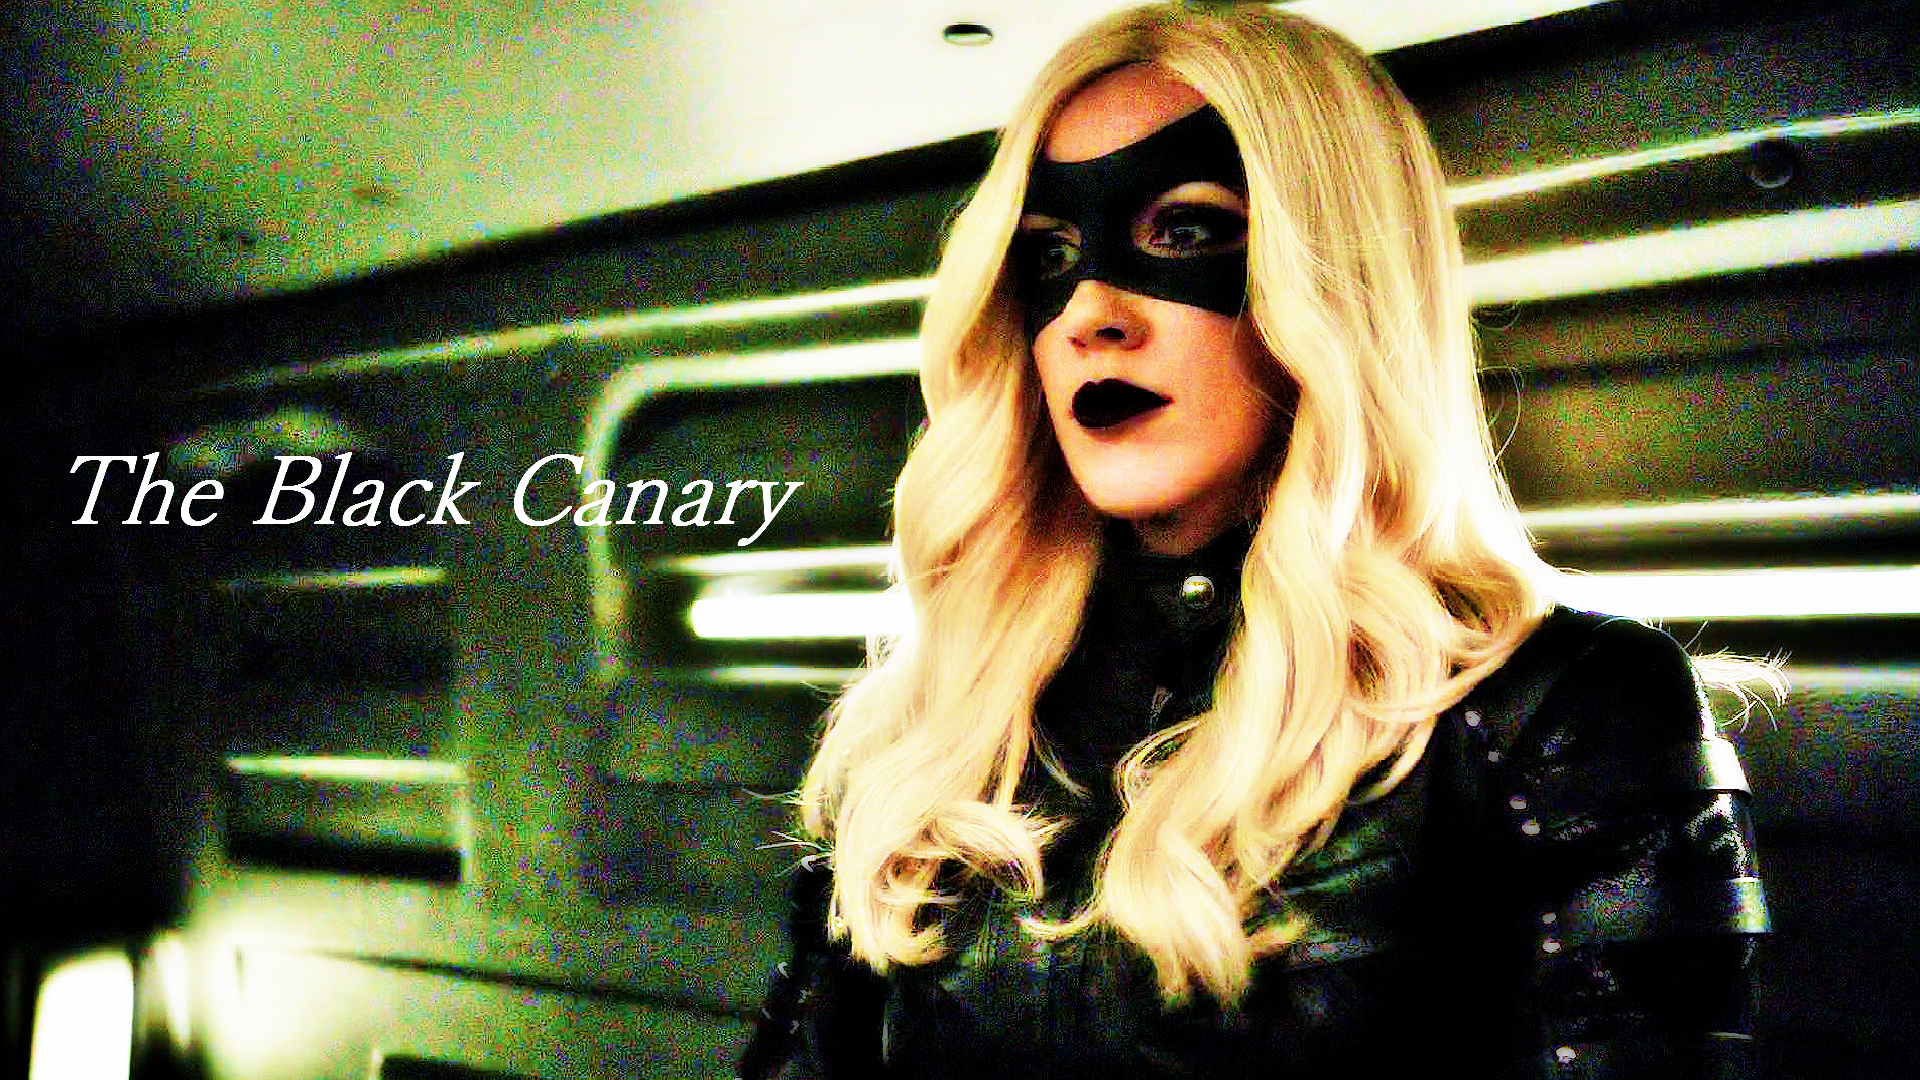 Laurel Lance/black Canary Wallpaper - Black Canary , HD Wallpaper & Backgrounds